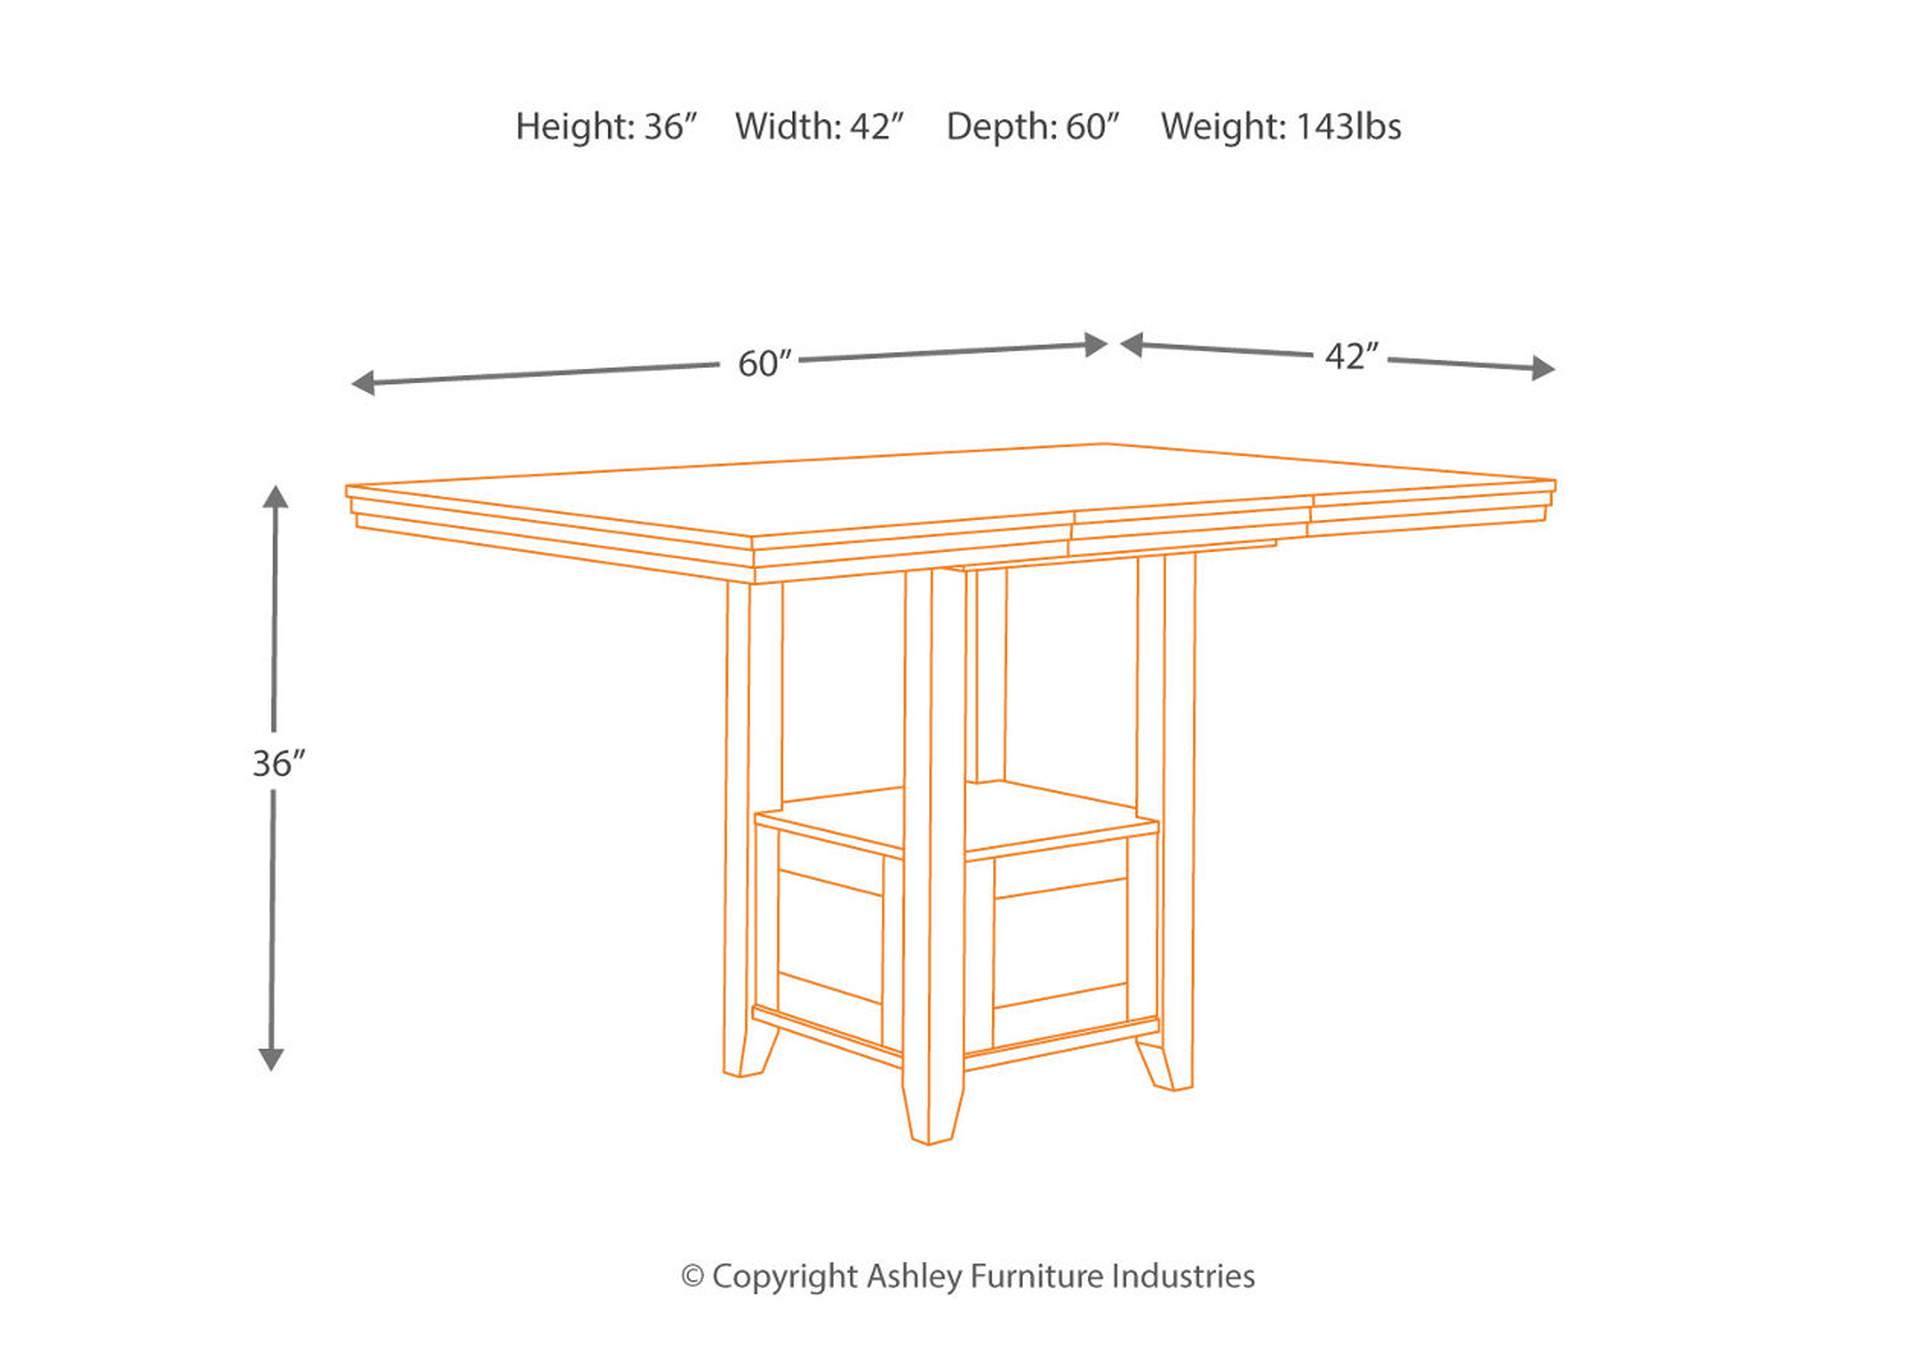 Ralene Counter Height Dining Room Extension Table,Direct To Consumer Express